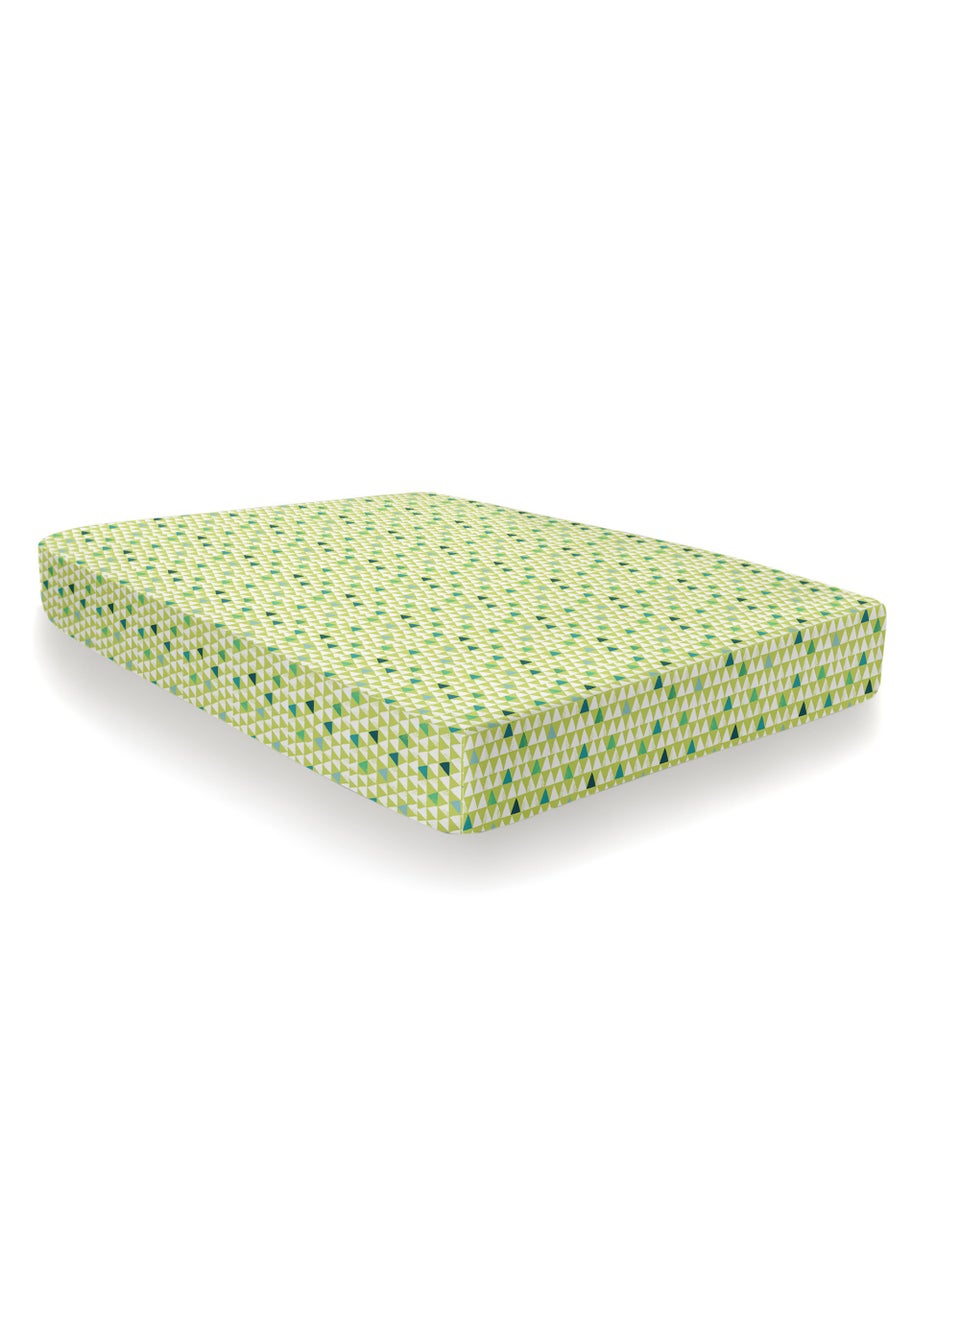 Bedlam Dino Fitted Bed Sheet